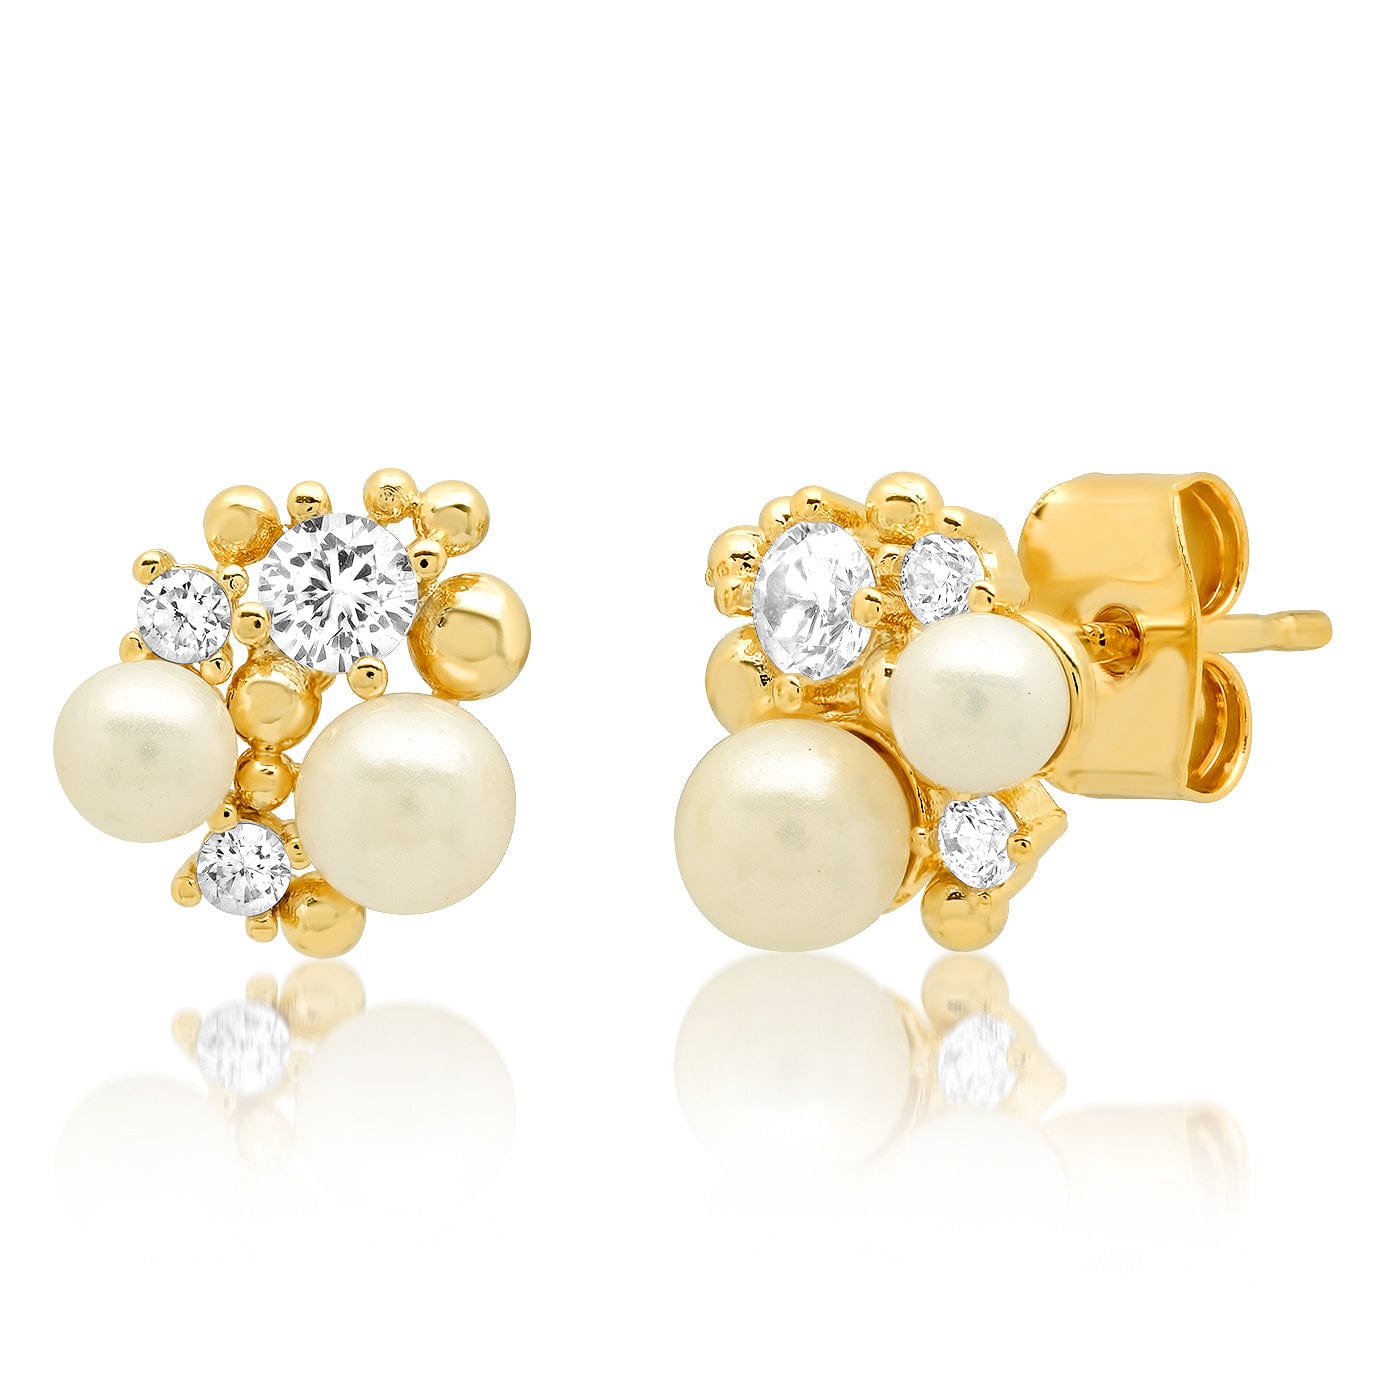 TAI JEWELRY Earrings Pearl And Cz Cluster Stud